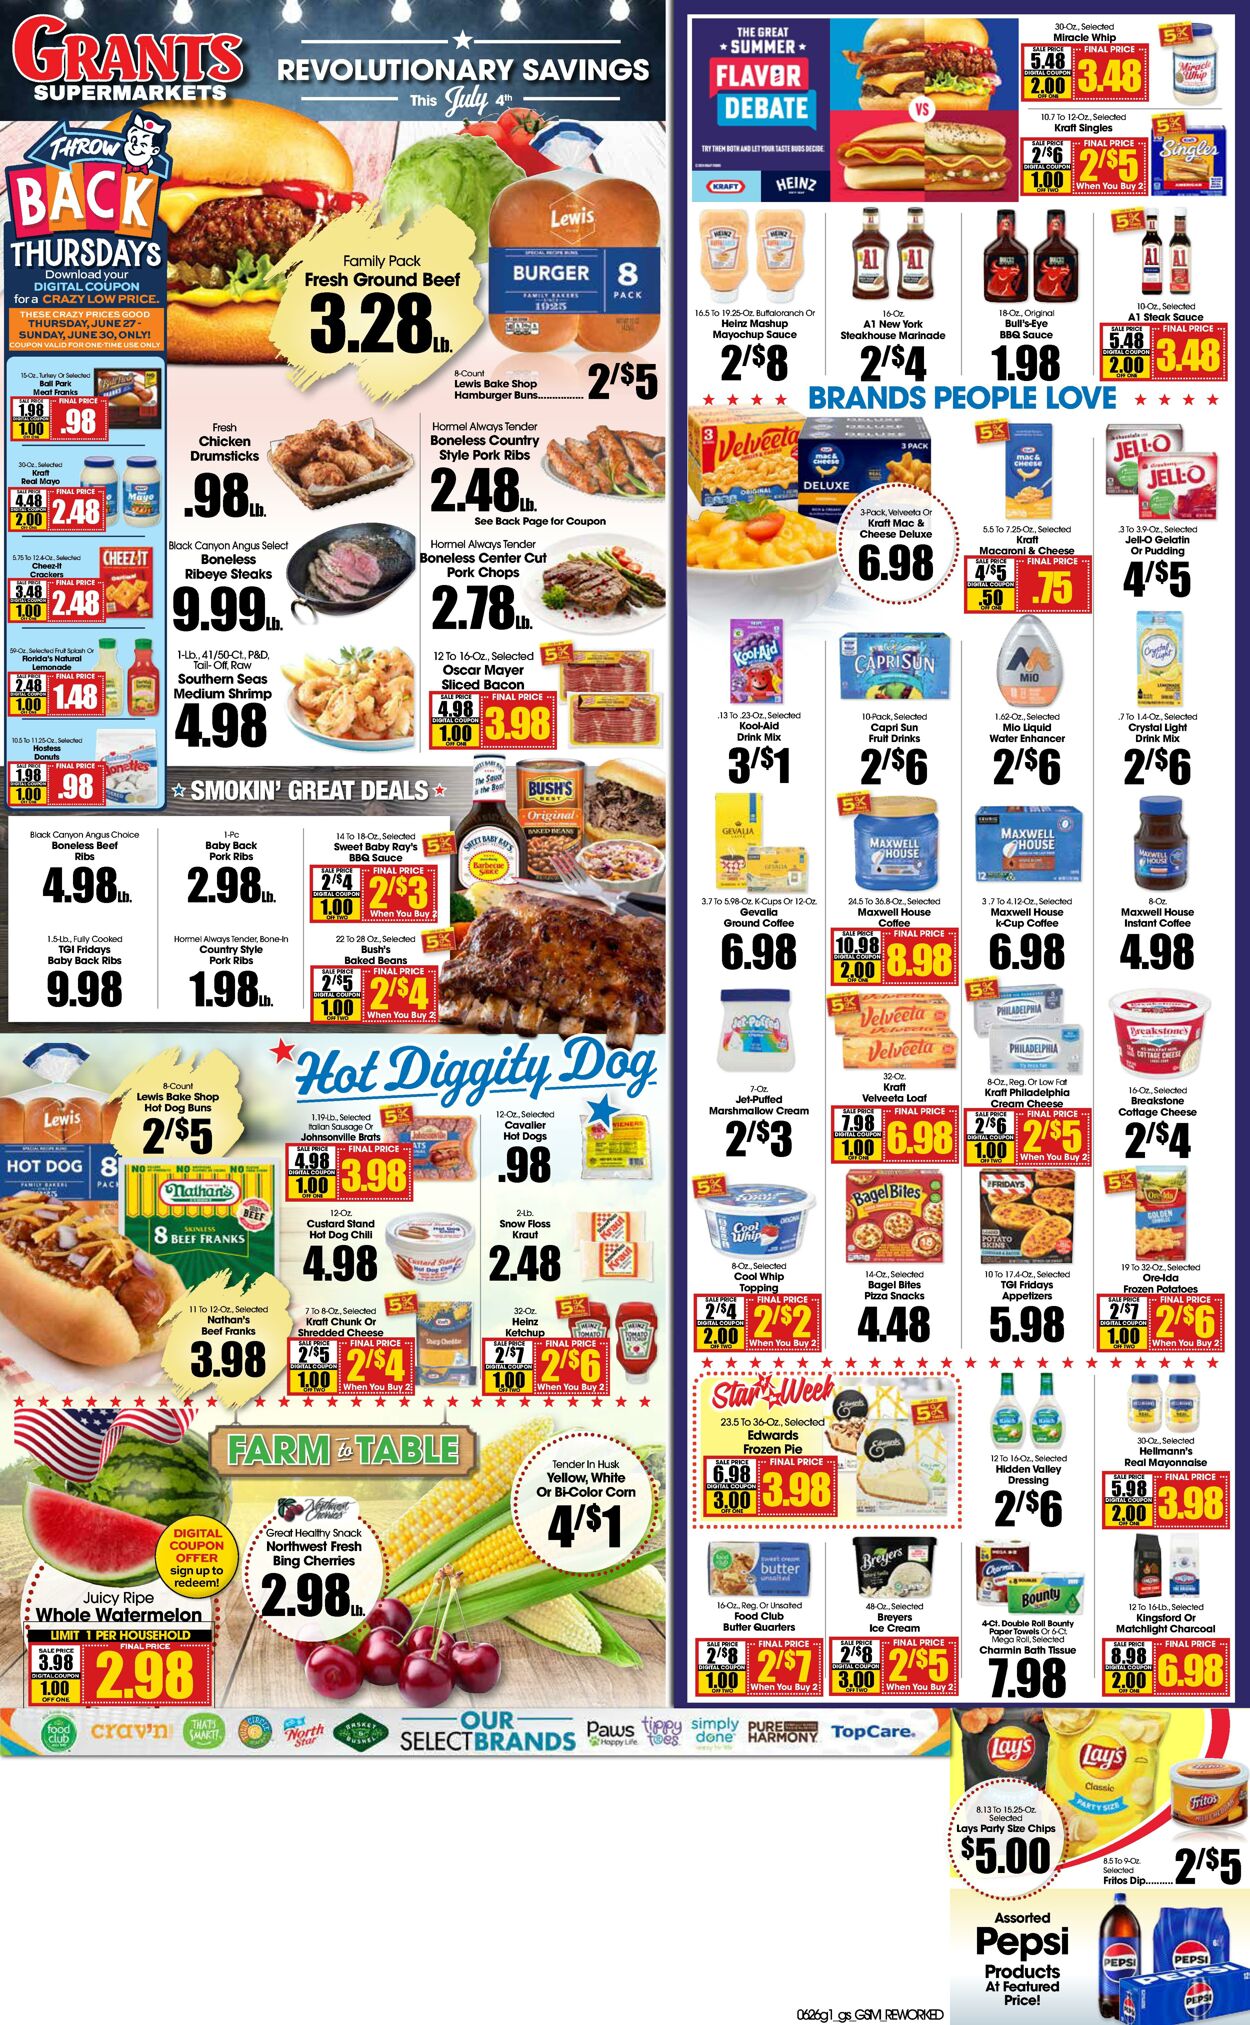 Grant's Supermarkets Promotional weekly ads